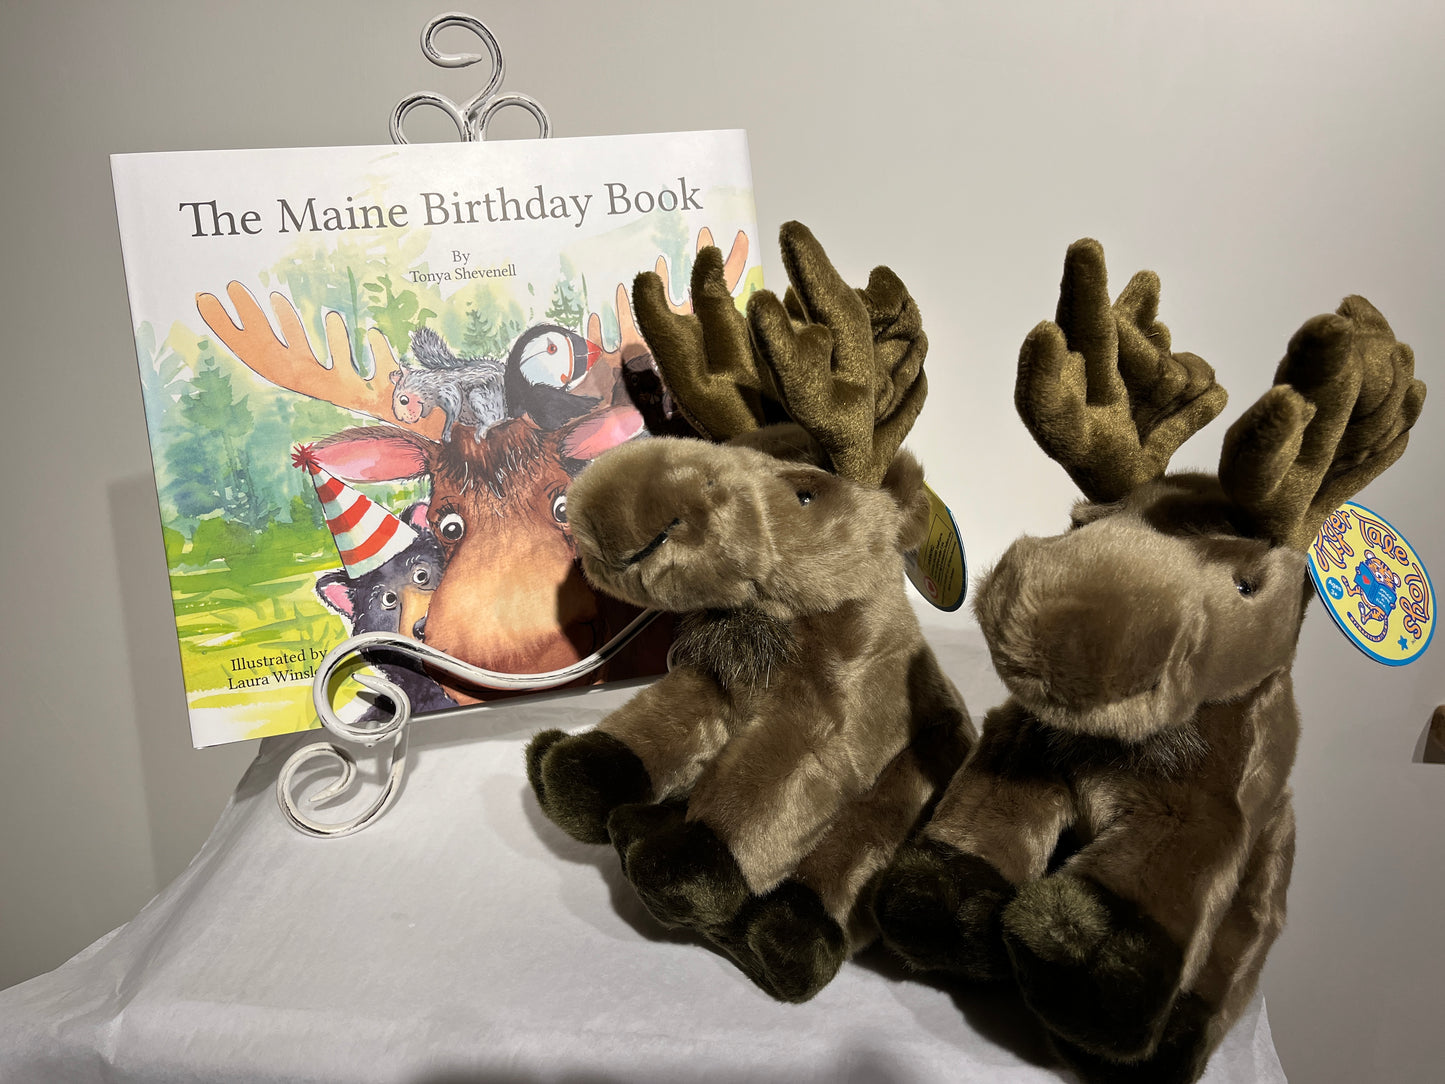 The Maine Birthday Book and Two Stuffed Moose